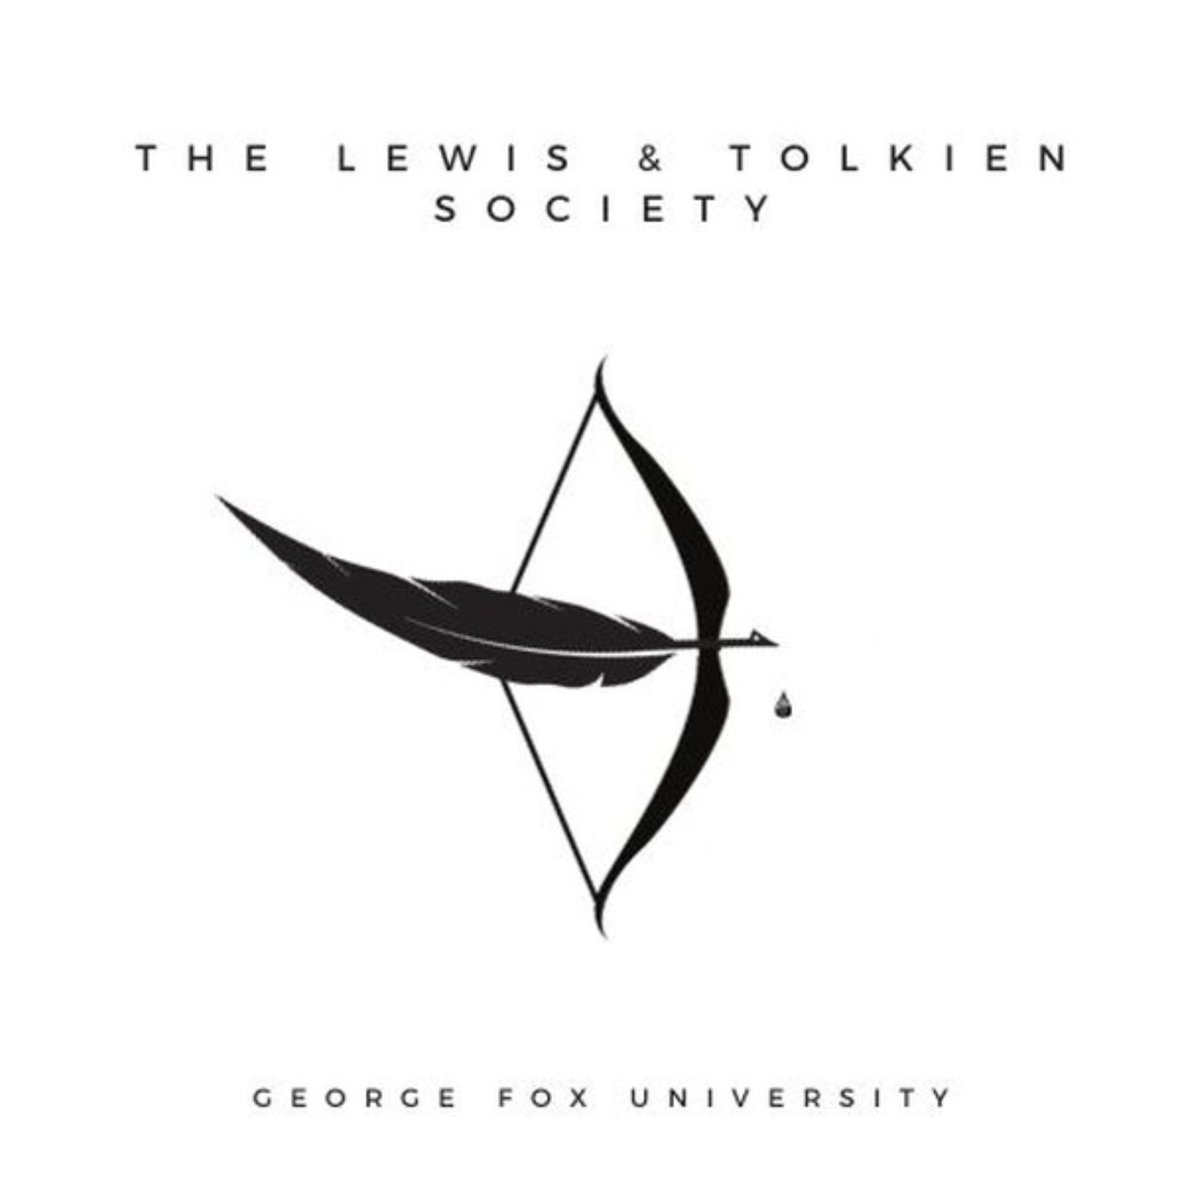 Did you know that George Fox University has a new student society called The Lewis & Tolkien Society? They meet every other Monday at 6:30pm. Tomorrow on November 27th in Hoover 206, the NYT bestselling fantasy author @BrentWeeks will be speaking about the parts the two most…